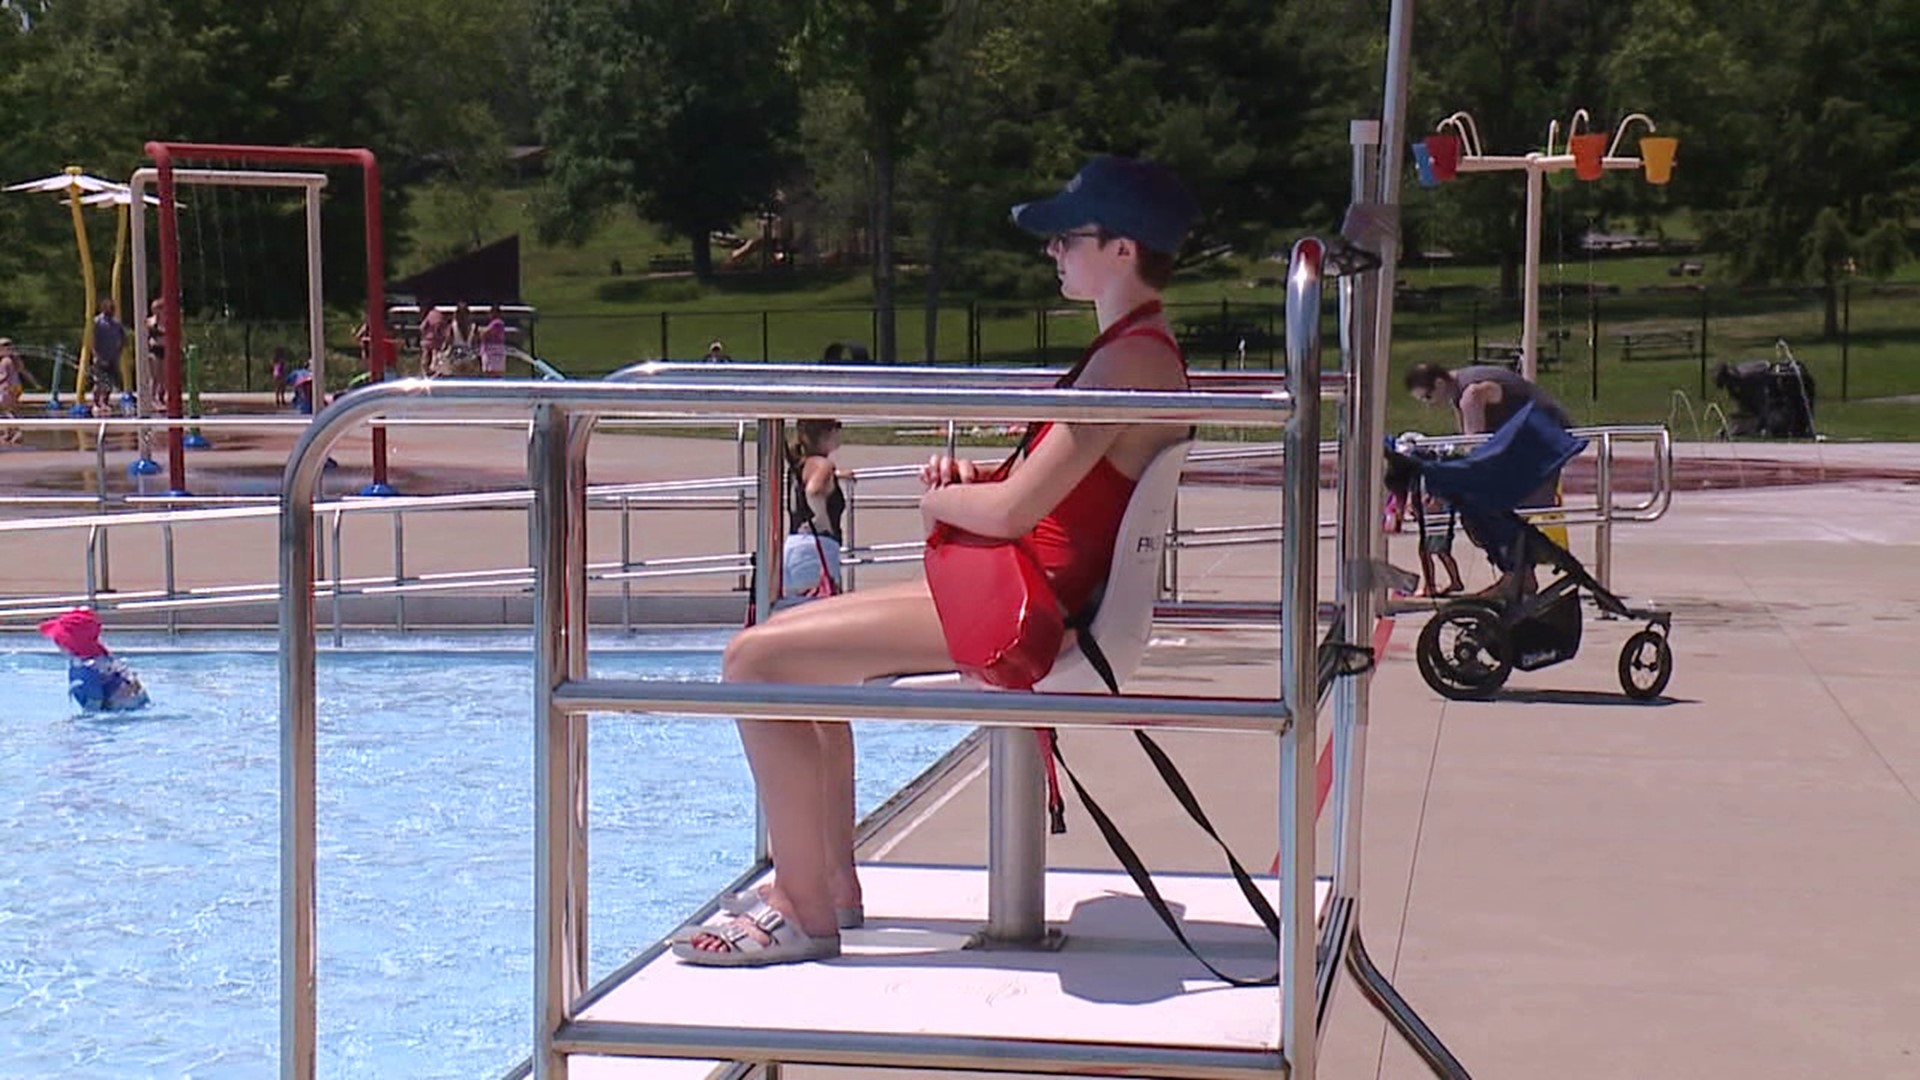 As Newswatch 16's Andy Palumbo reports, our area, and much of America, is stuck in a lifeguard shortage.